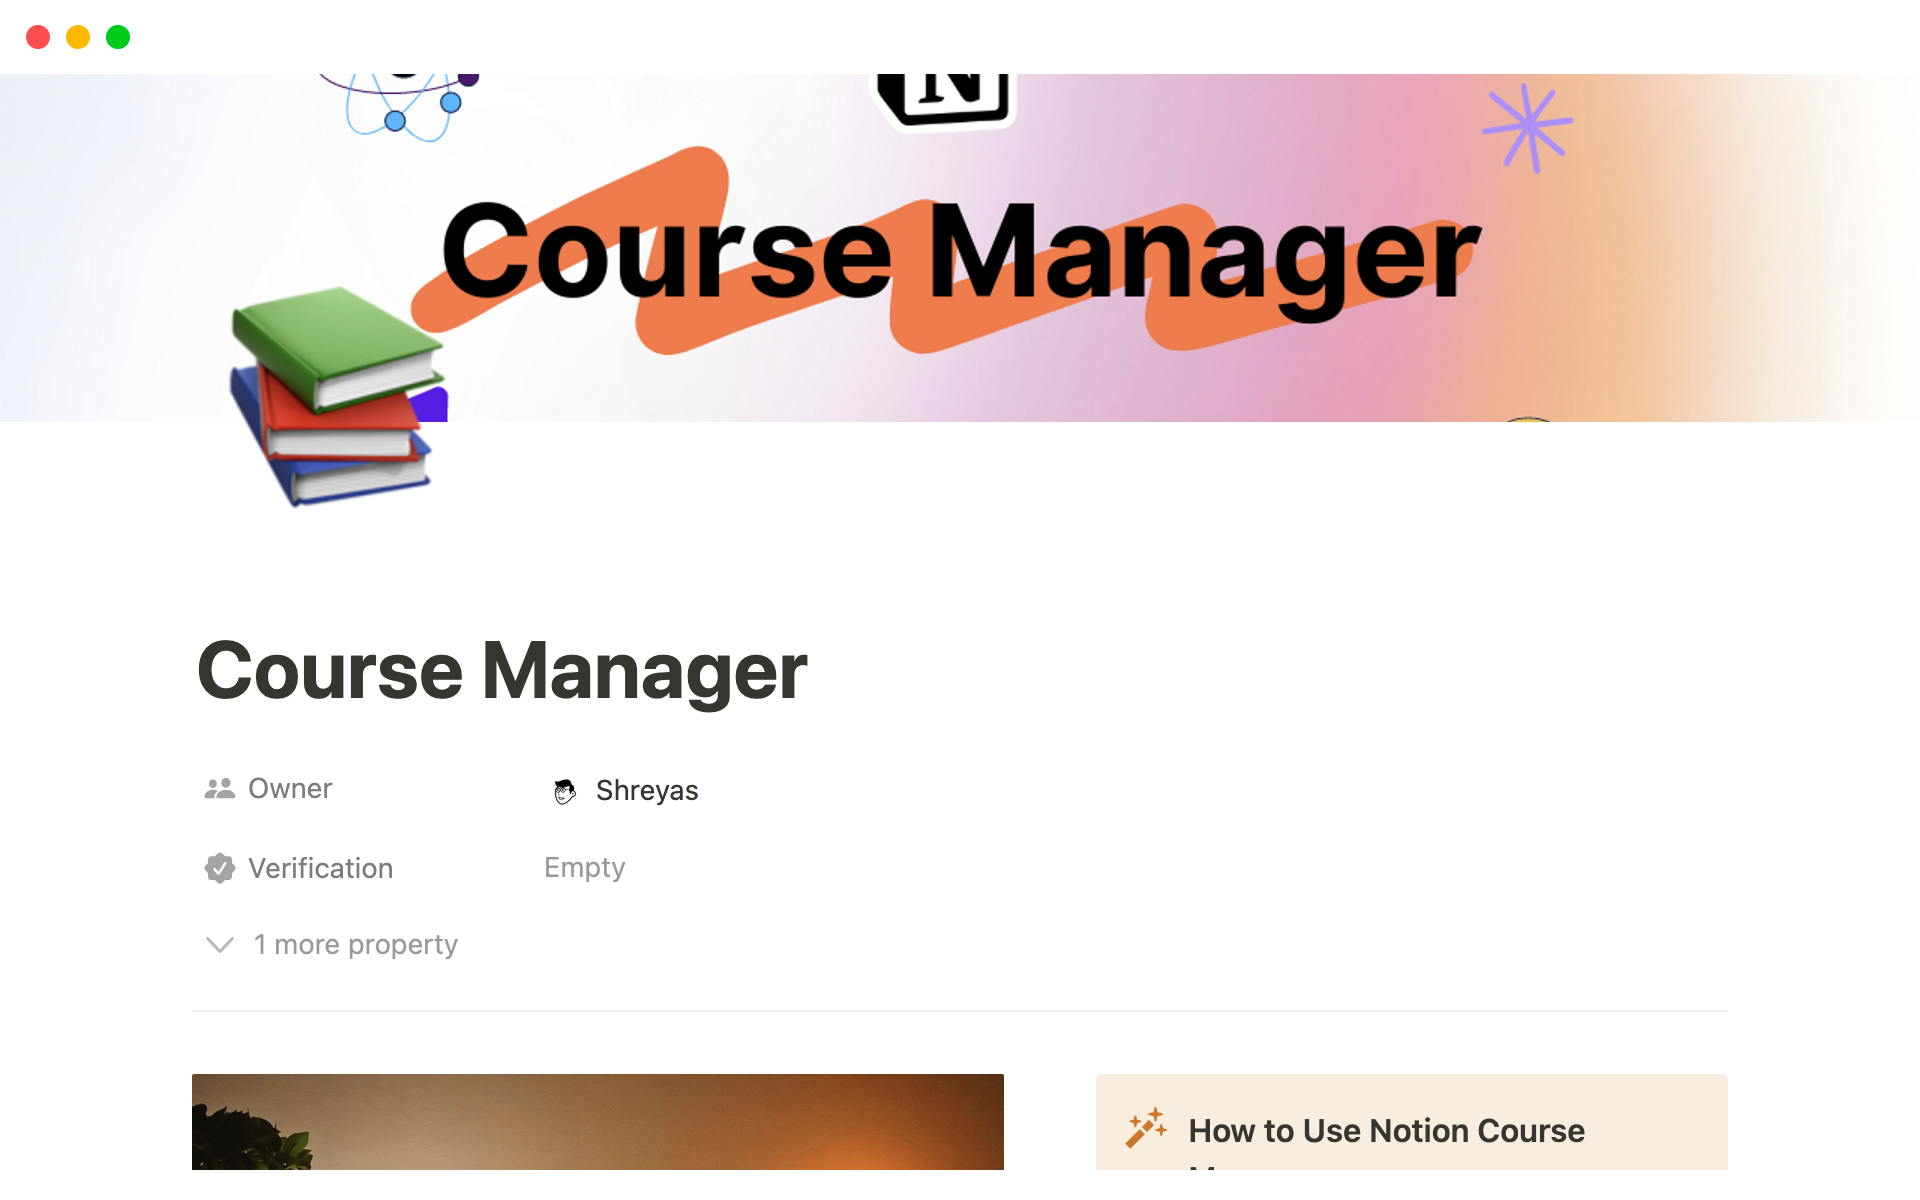 The template provides a comprehensive platform for organizing, sharing, and managing course materials, activities, and student engagement in a centralized and user-friendly manner.